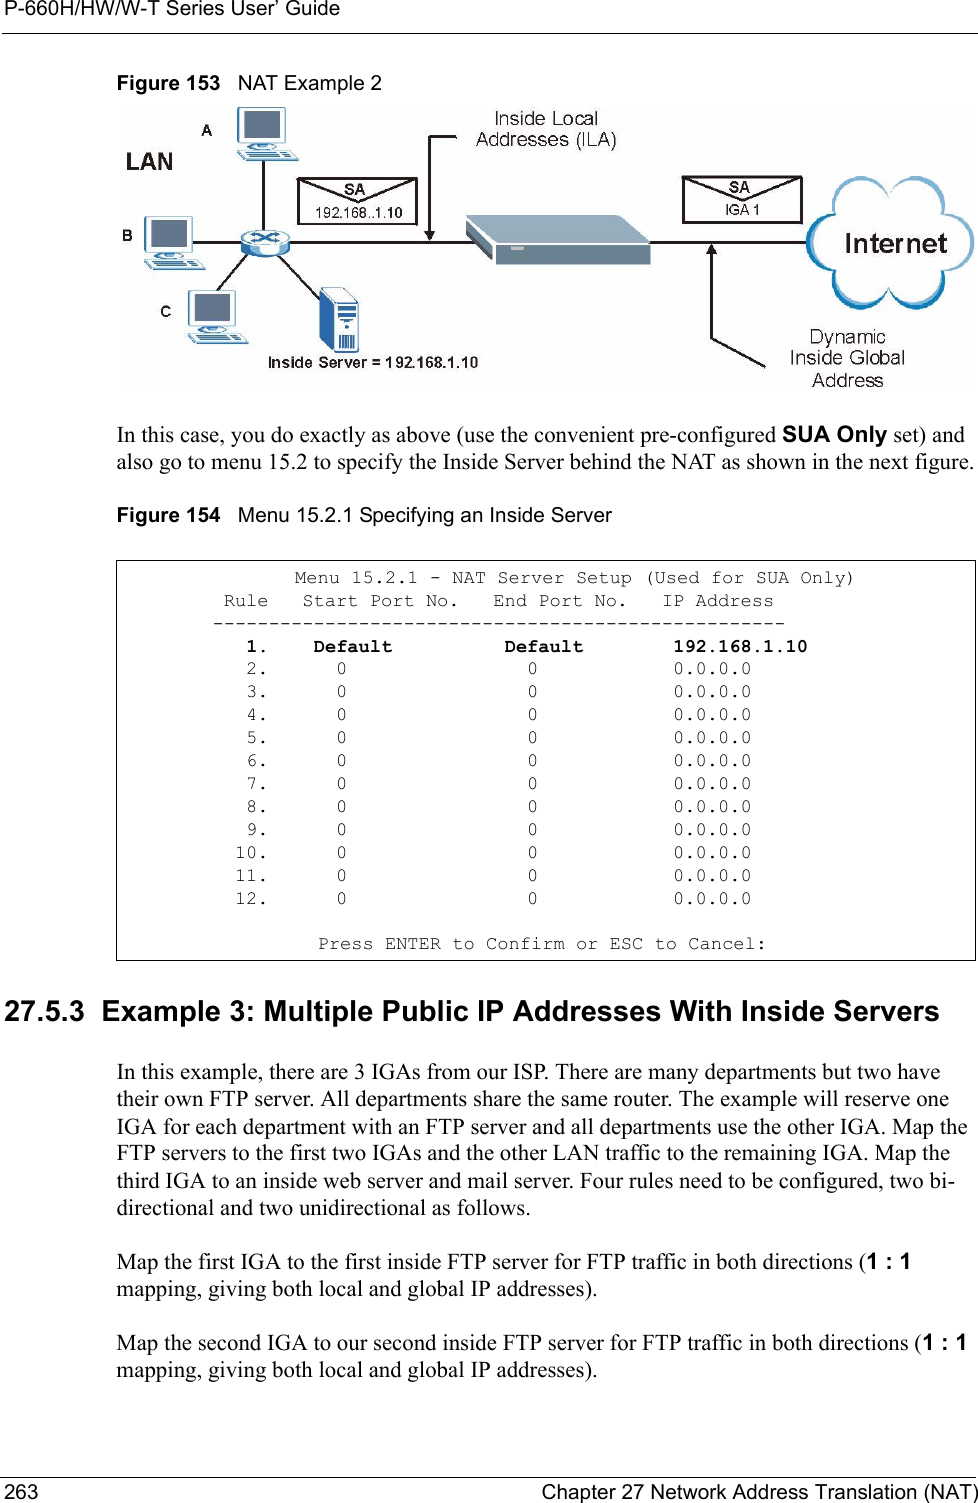 P-660H/HW/W-T Series User’ Guide263 Chapter 27 Network Address Translation (NAT)Figure 153   NAT Example 2In this case, you do exactly as above (use the convenient pre-configured SUA Only set) and also go to menu 15.2 to specify the Inside Server behind the NAT as shown in the next figure.Figure 154   Menu 15.2.1 Specifying an Inside Server27.5.3  Example 3: Multiple Public IP Addresses With Inside ServersIn this example, there are 3 IGAs from our ISP. There are many departments but two have their own FTP server. All departments share the same router. The example will reserve one IGA for each department with an FTP server and all departments use the other IGA. Map the FTP servers to the first two IGAs and the other LAN traffic to the remaining IGA. Map the third IGA to an inside web server and mail server. Four rules need to be configured, two bi-directional and two unidirectional as follows.Map the first IGA to the first inside FTP server for FTP traffic in both directions (1 : 1 mapping, giving both local and global IP addresses).Map the second IGA to our second inside FTP server for FTP traffic in both directions (1 : 1 mapping, giving both local and global IP addresses).  Menu 15.2.1 - NAT Server Setup (Used for SUA Only)         Rule   Start Port No.   End Port No.   IP Address        ---------------------------------------------------           1.    Default          Default        192.168.1.10           2.      0                0            0.0.0.0           3.      0                0            0.0.0.0           4.      0                0            0.0.0.0           5.      0                0            0.0.0.0           6.      0                0            0.0.0.0           7.      0                0            0.0.0.0           8.      0                0            0.0.0.0           9.      0                0            0.0.0.0          10.      0                0            0.0.0.0          11.      0                0            0.0.0.0          12.      0                0            0.0.0.0    Press ENTER to Confirm or ESC to Cancel: